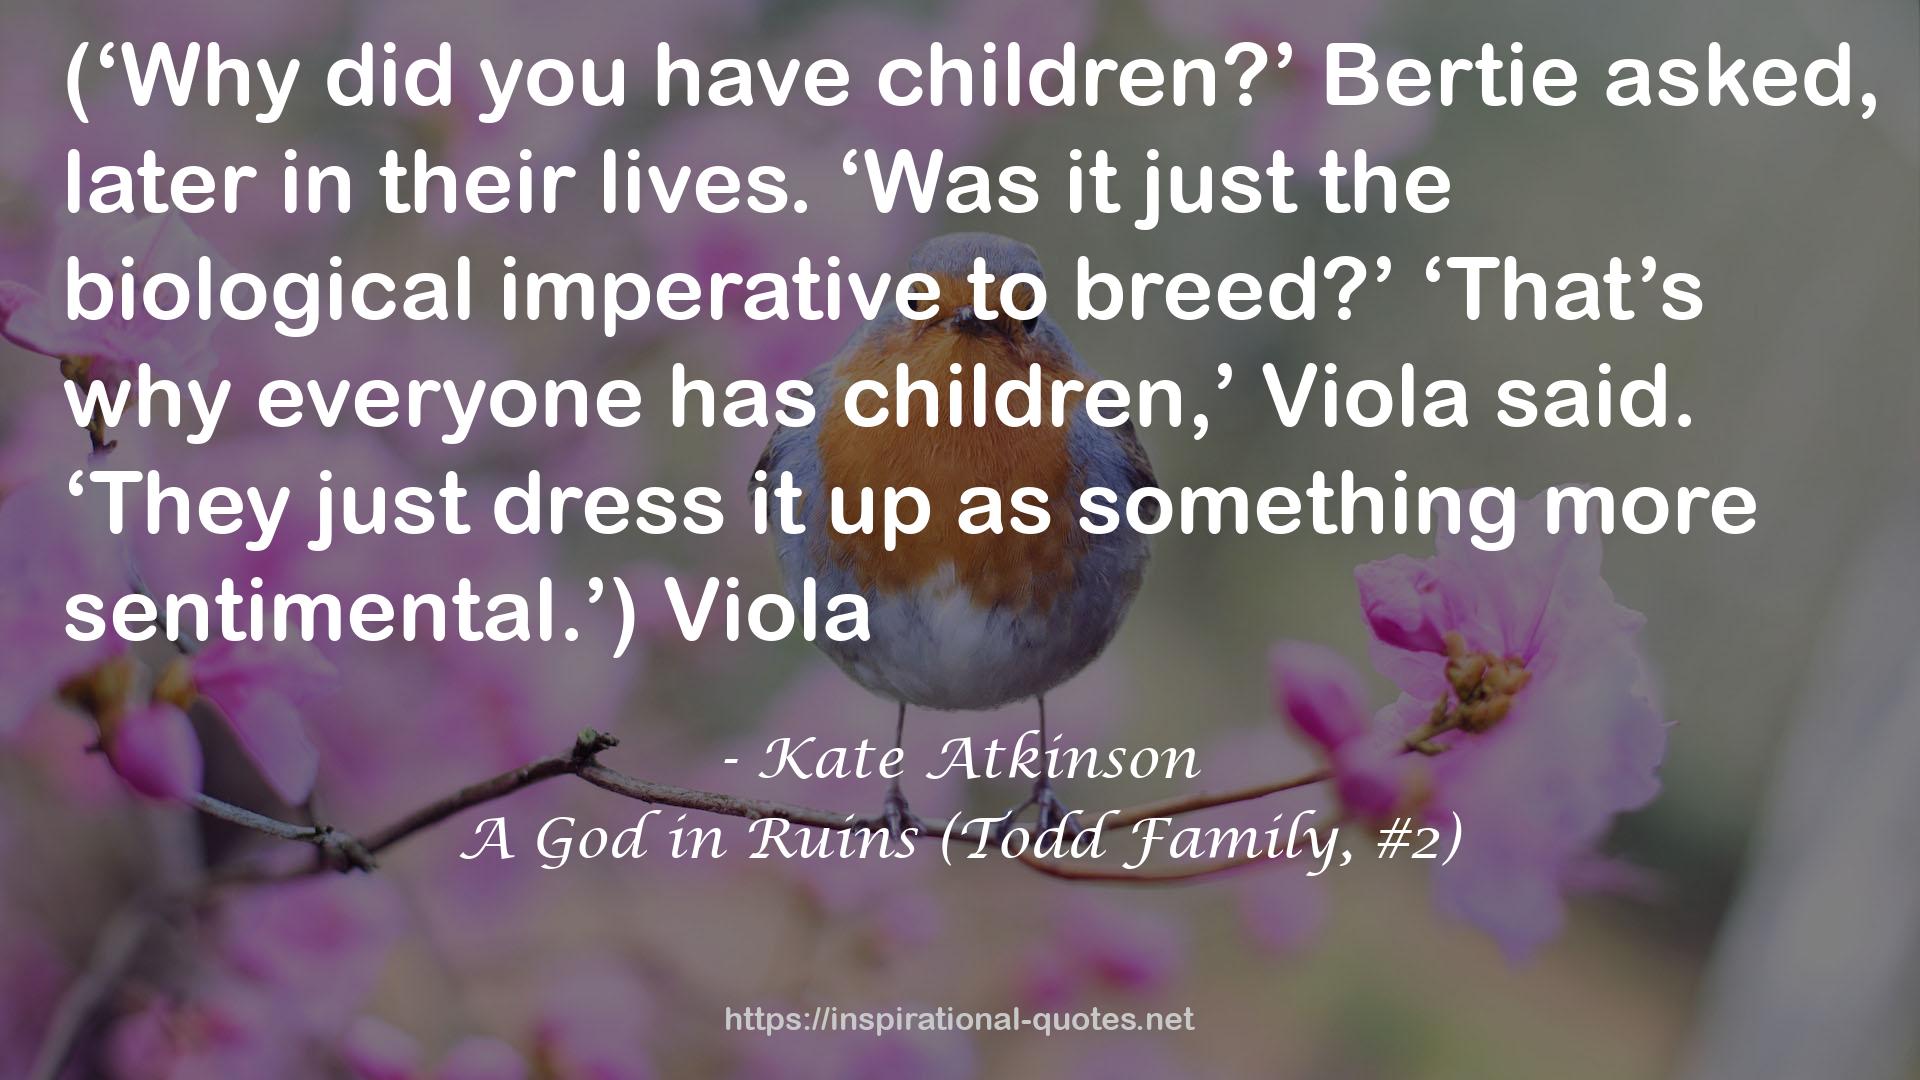 A God in Ruins (Todd Family, #2) QUOTES